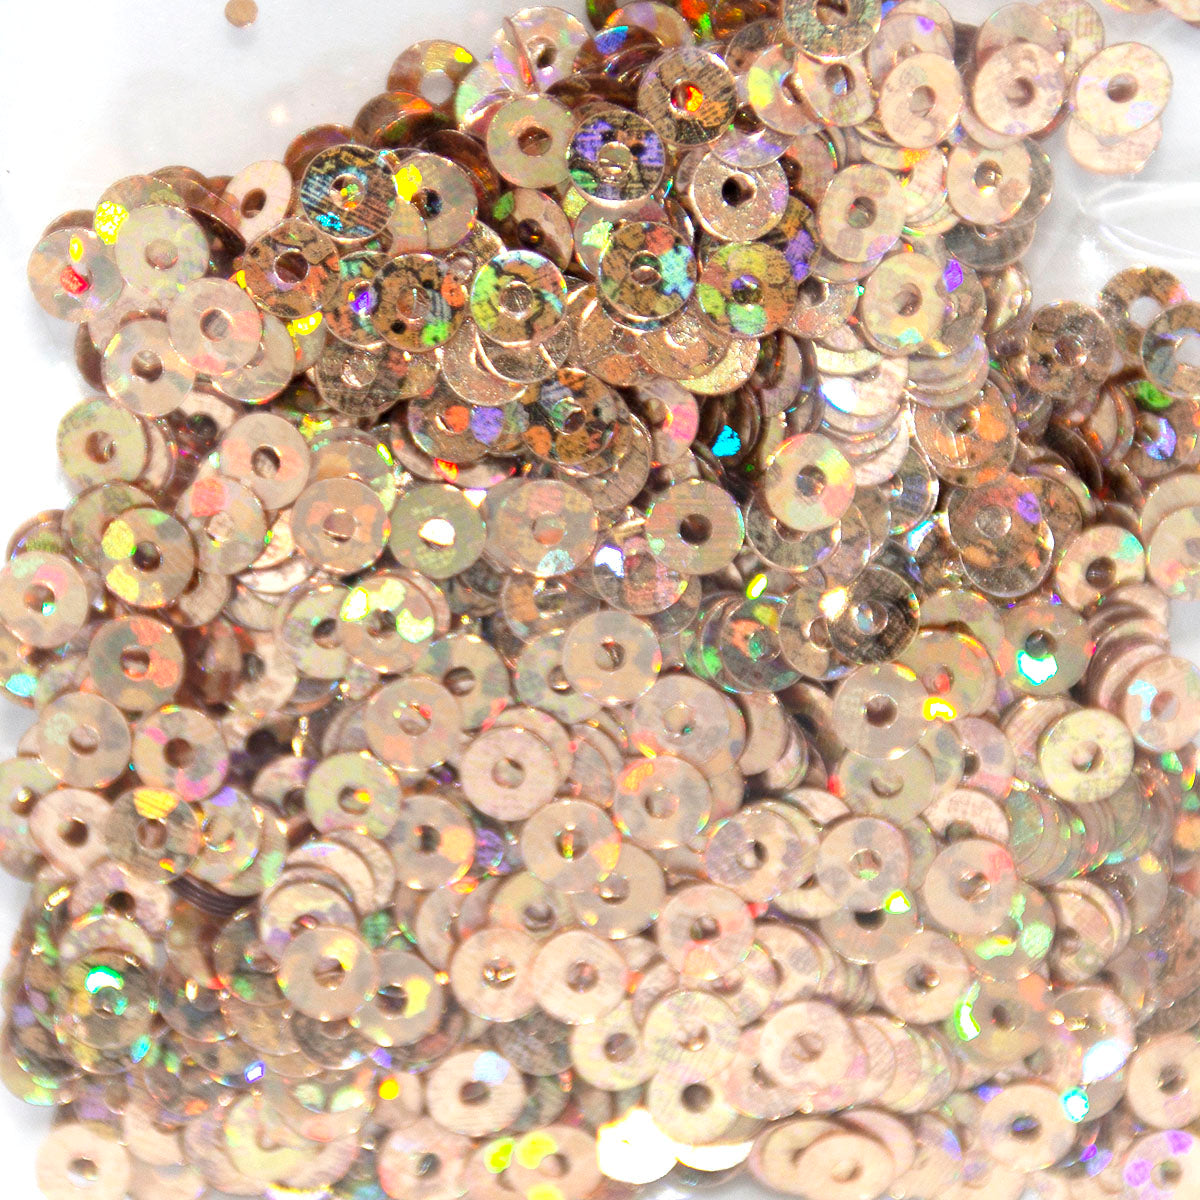  www.colourstreams.com.au Colour Streams Sequins Embellishments Stitching Embroidery Costumes Mardi Gras Dancing Ballet Theatre Shows Drag Queen Bling Luminescent Sequins Flat Circle 3mm Bright Gold with Multi Lights S72